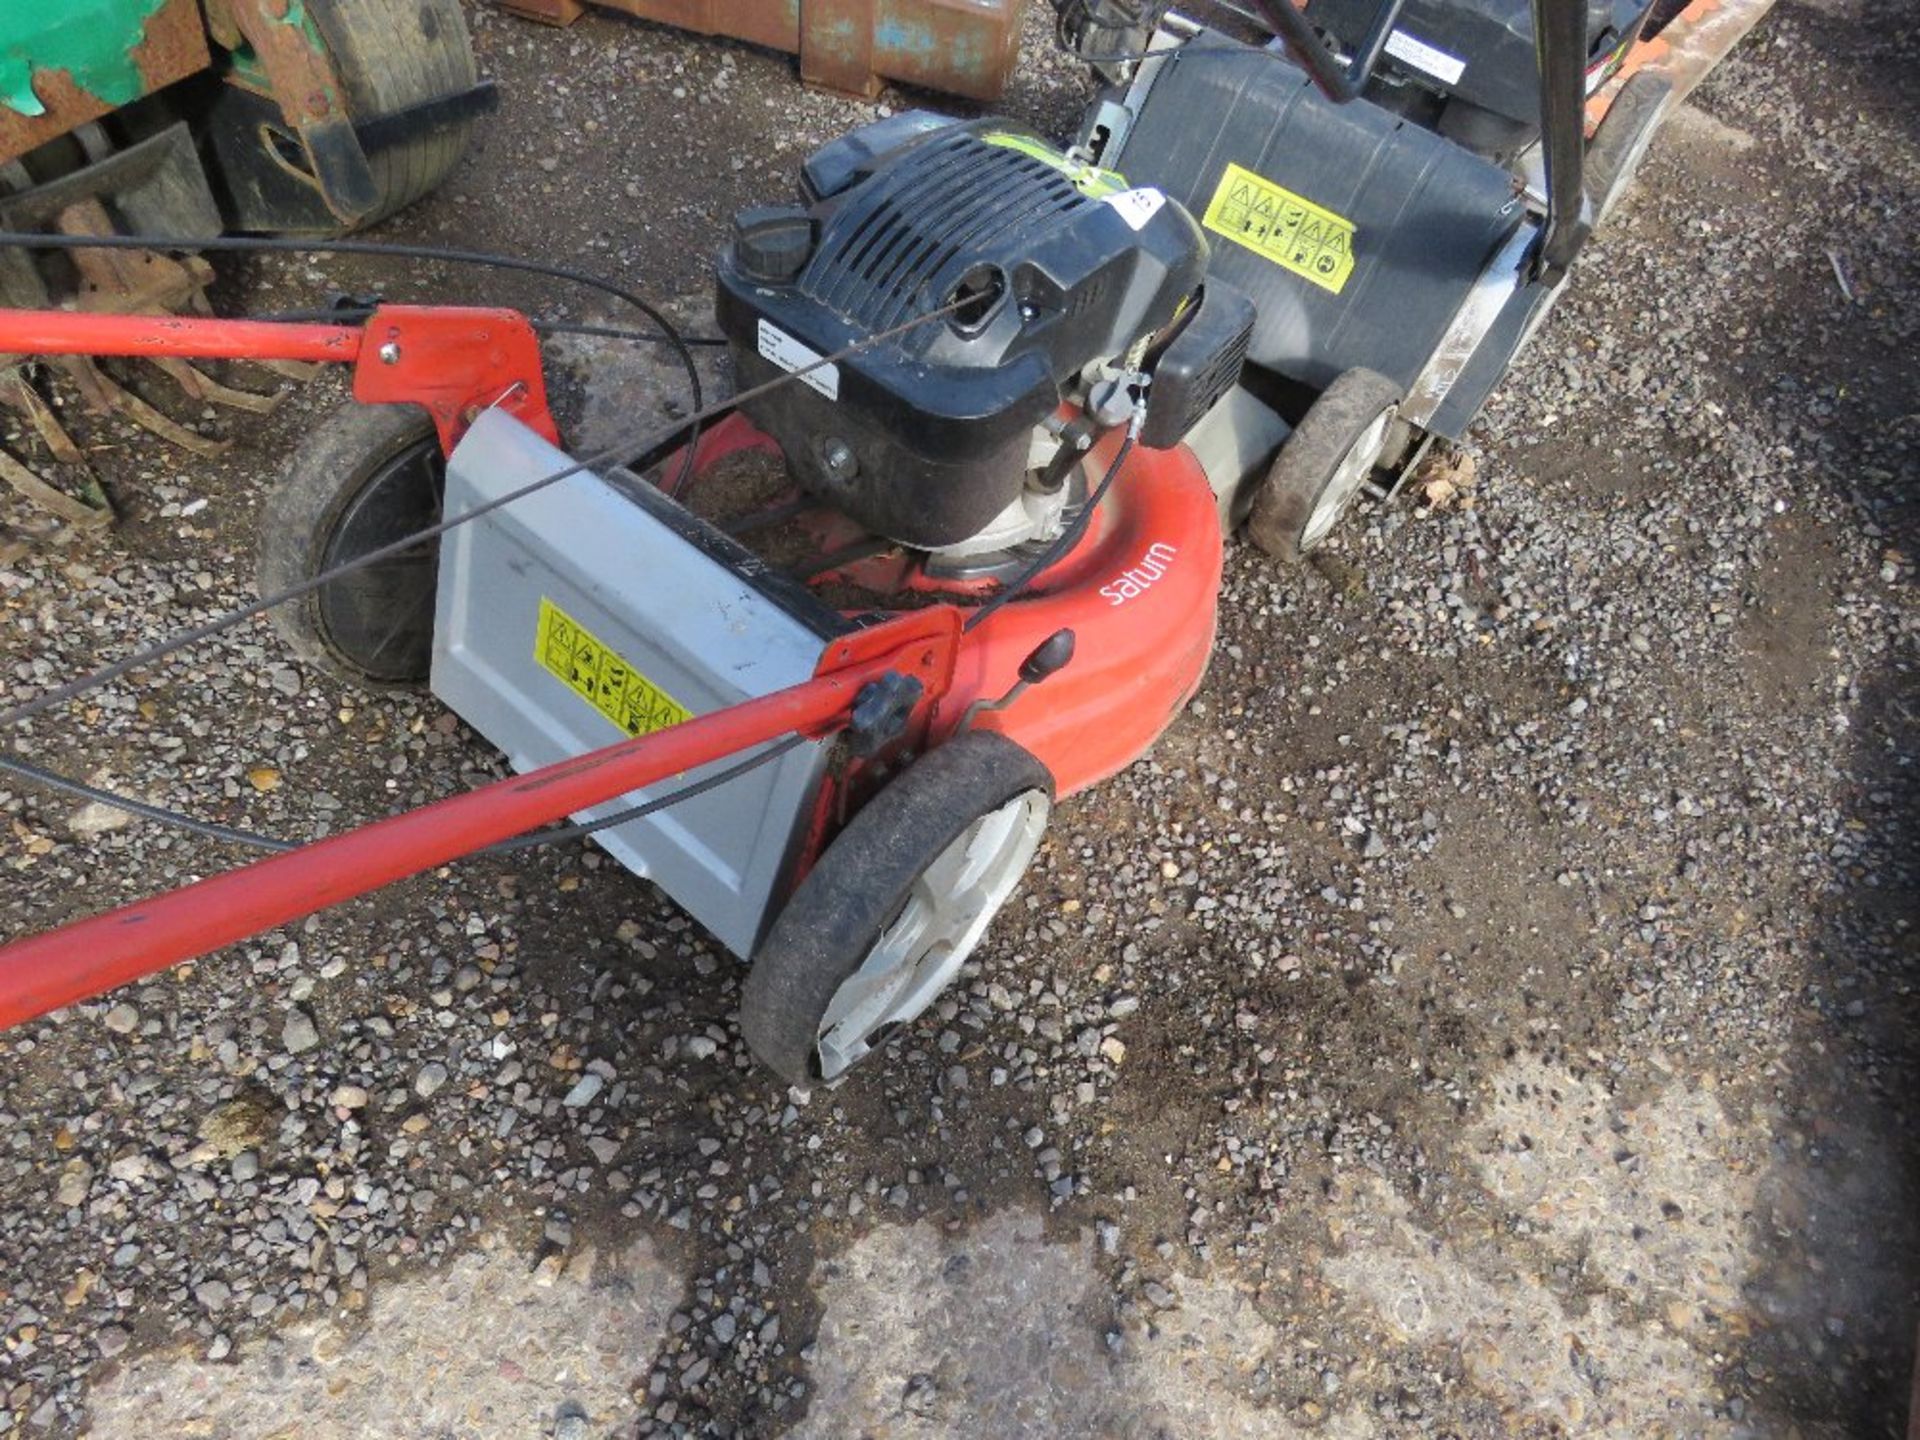 SATURN PETROL ENGINED MOWER. NO VAT ON THE HAMMER PRICE OF THIS ITEM. - Image 2 of 3